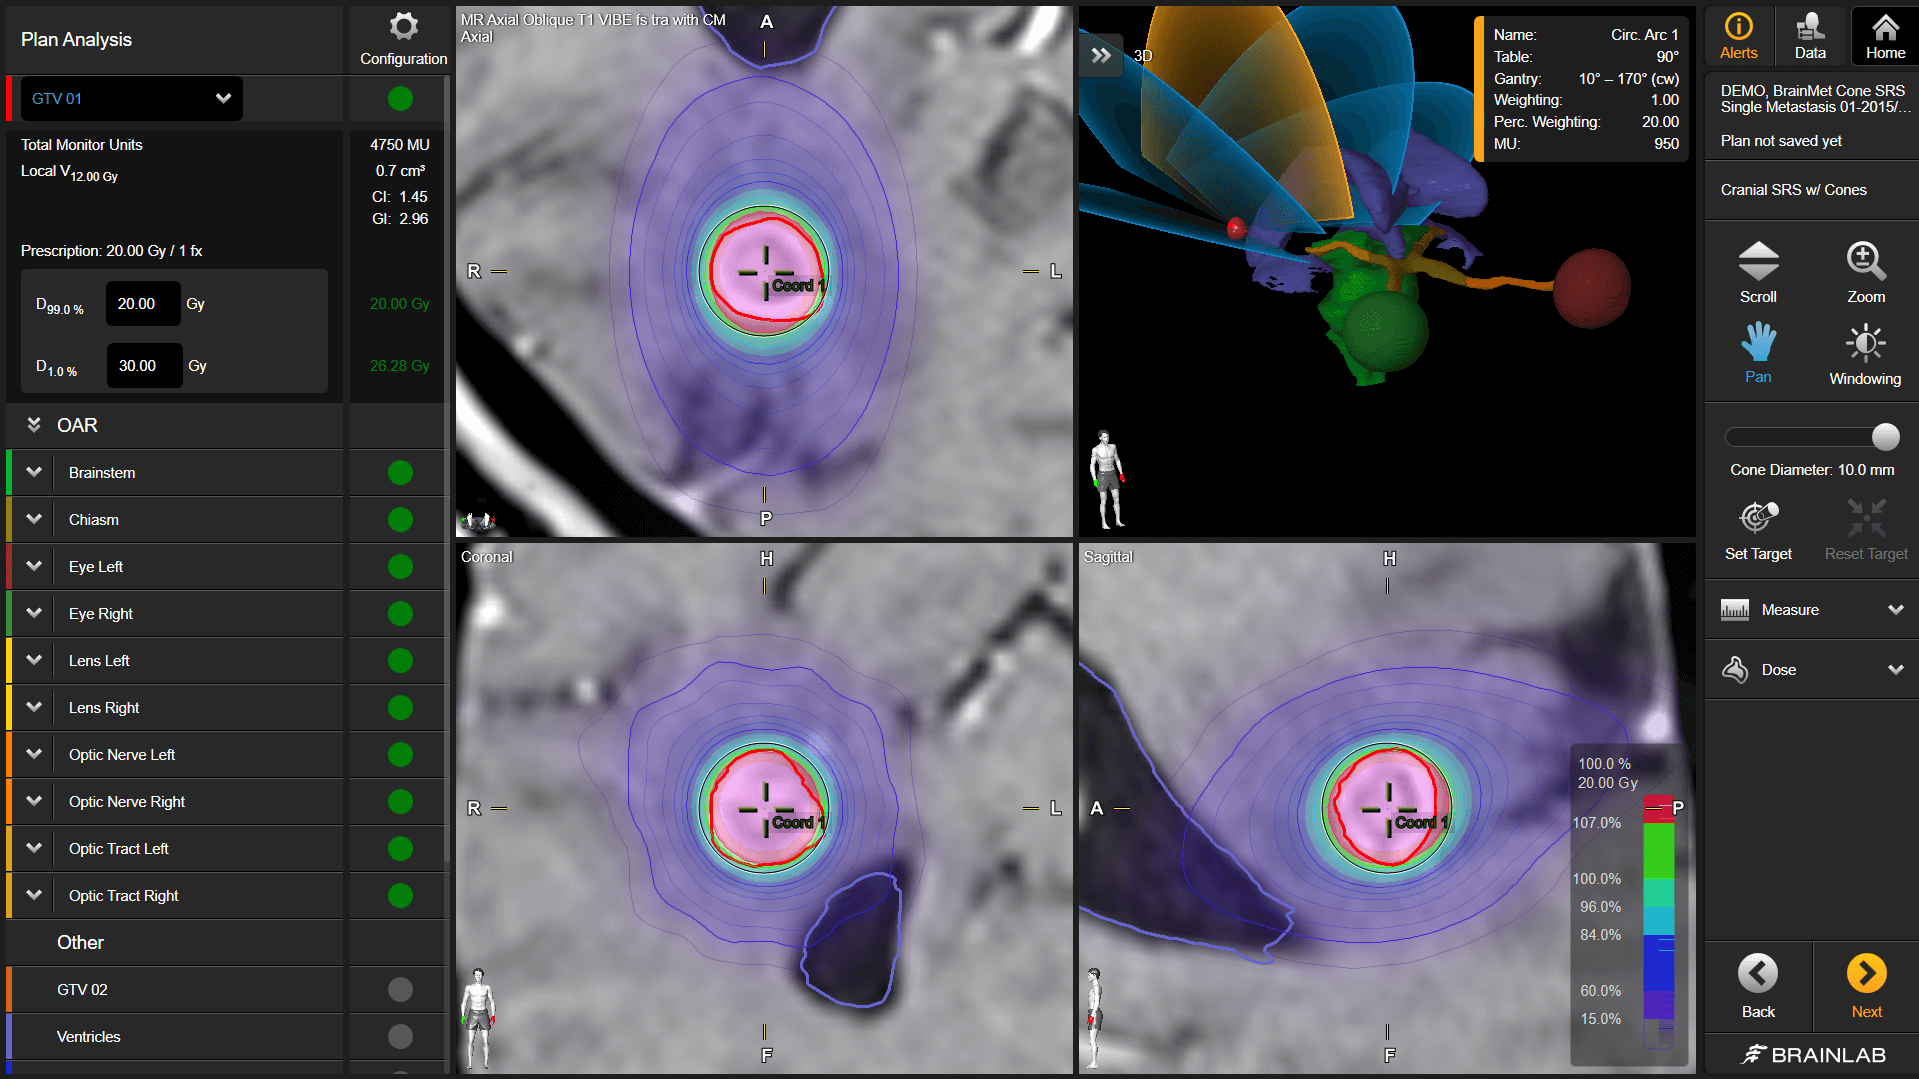 Software screen showing arc placement optimization during radiotherapy treatment planning which is intended to spare organs at risk from radiation 